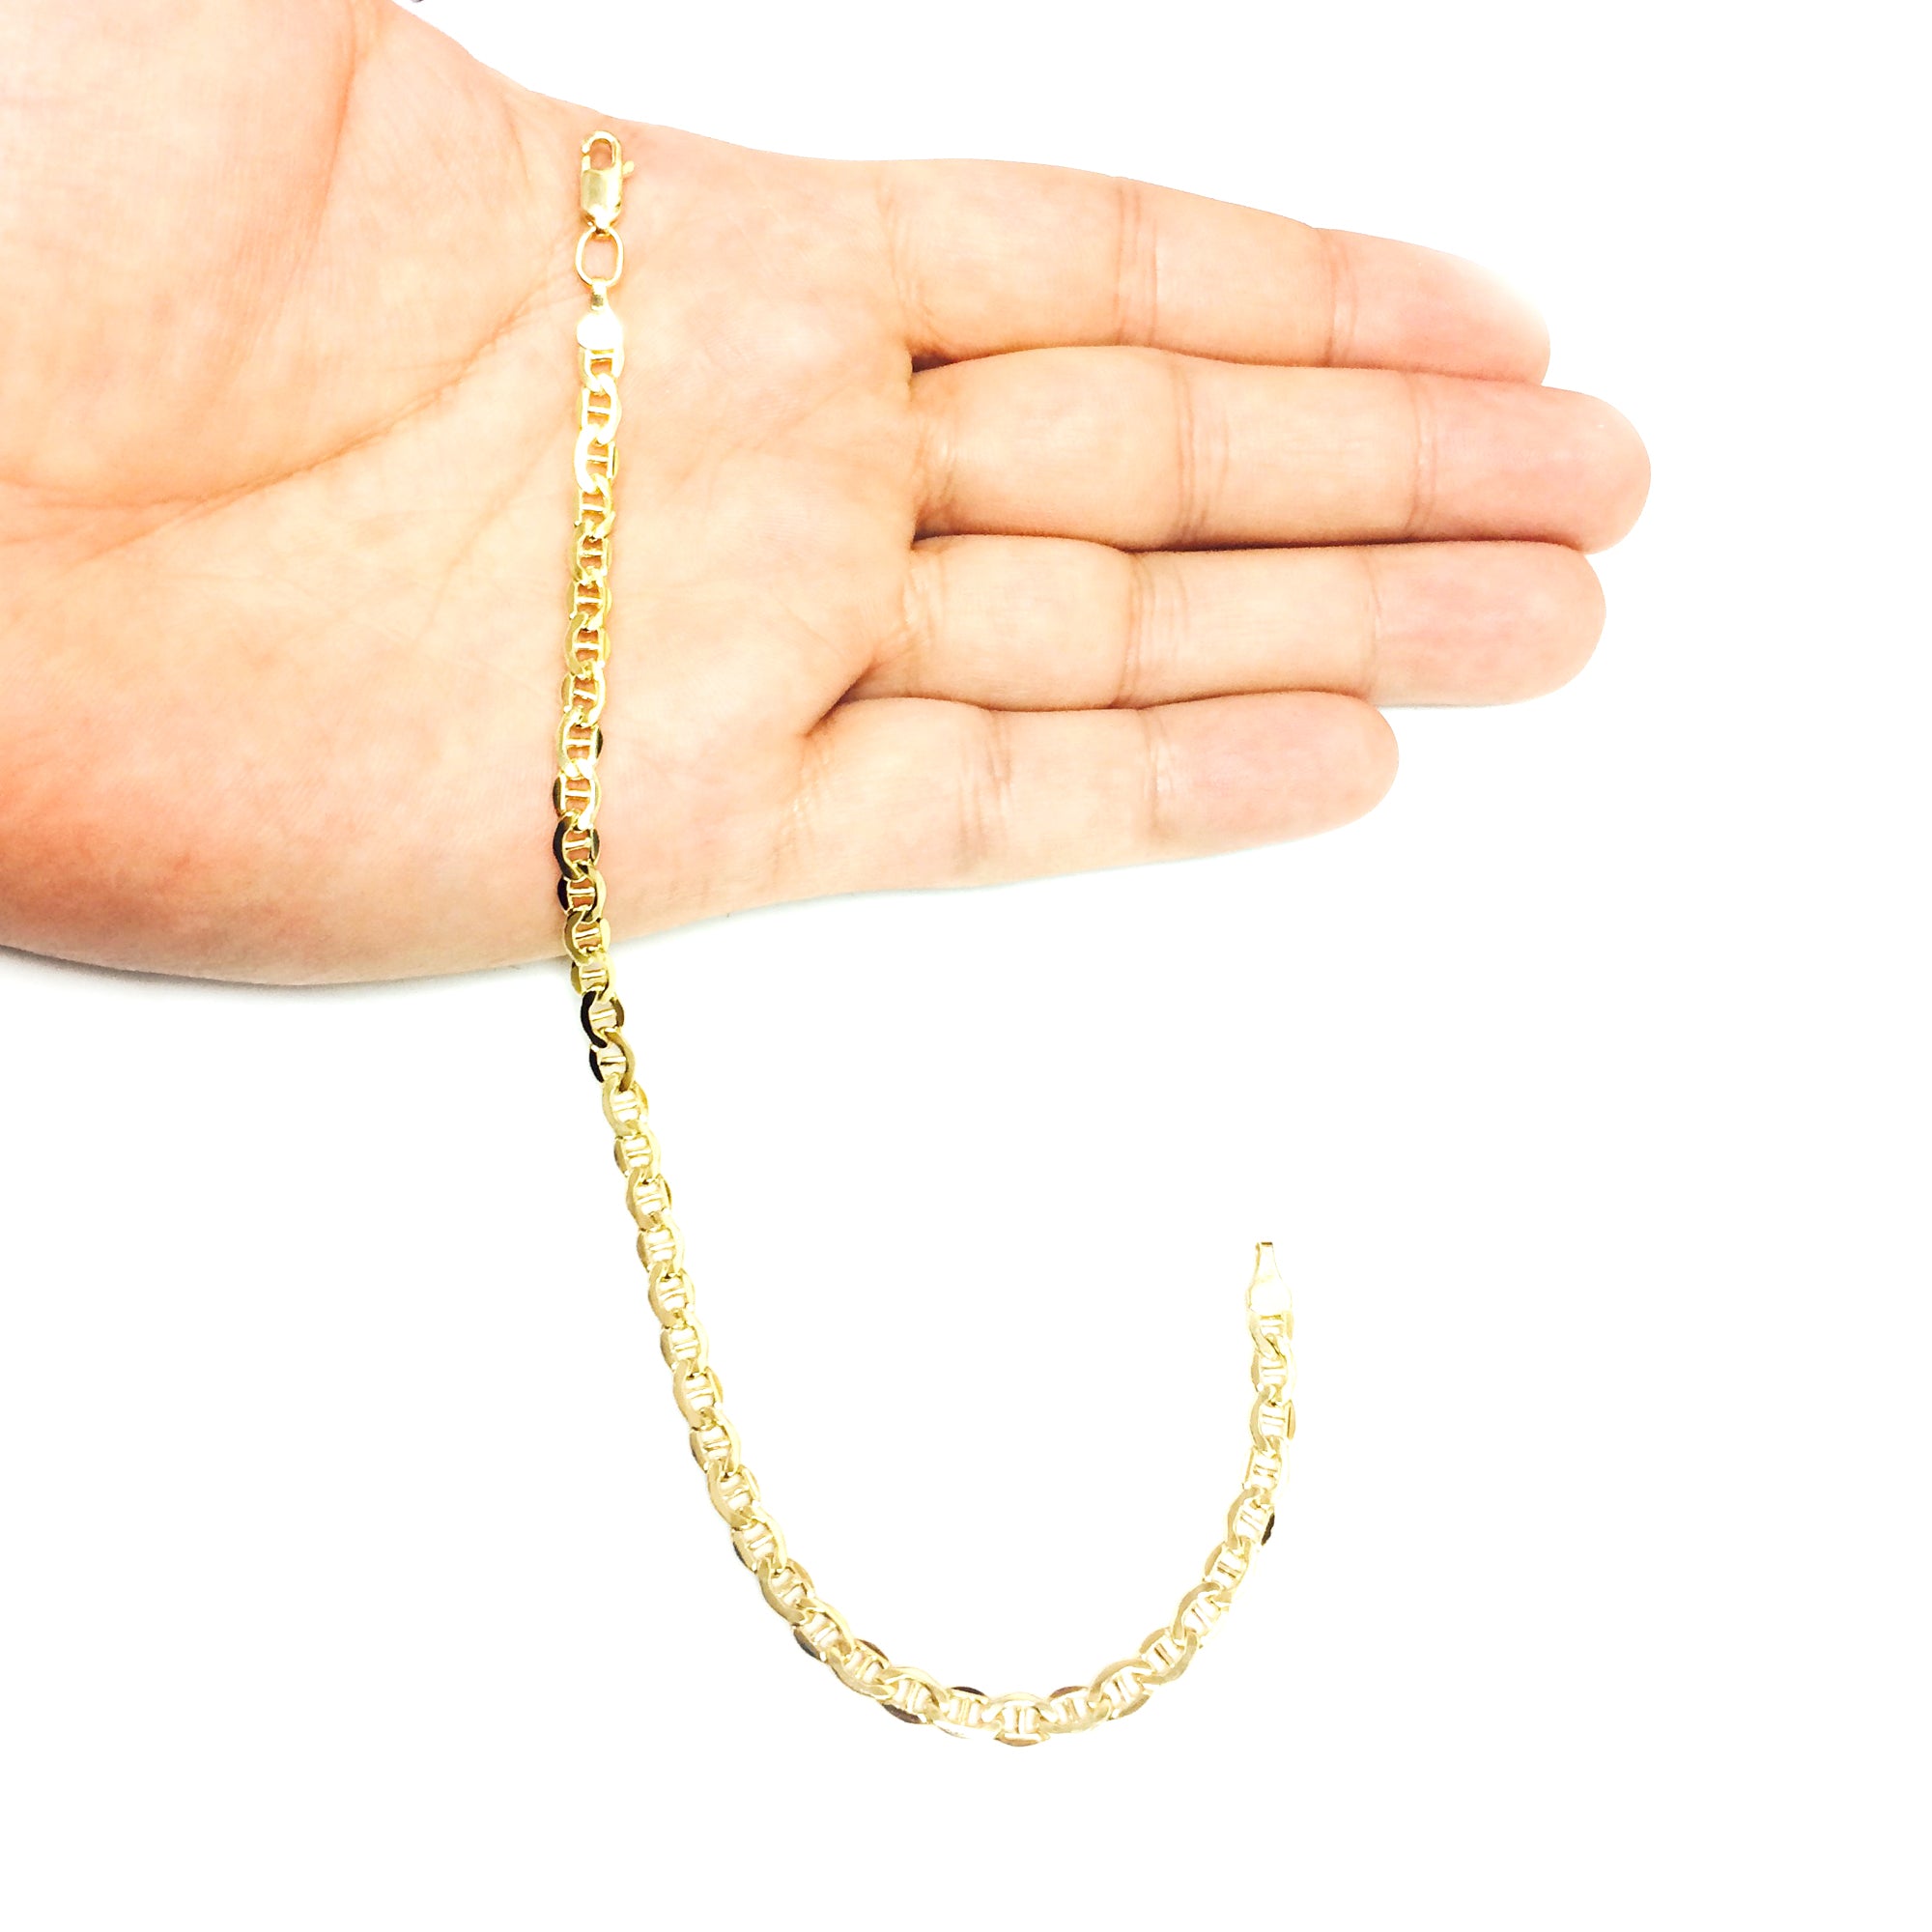 14K Yellow Gold Filled Solid Mariner Chain Bracelet, 4.5 mm, 8.5" fine designer jewelry for men and women